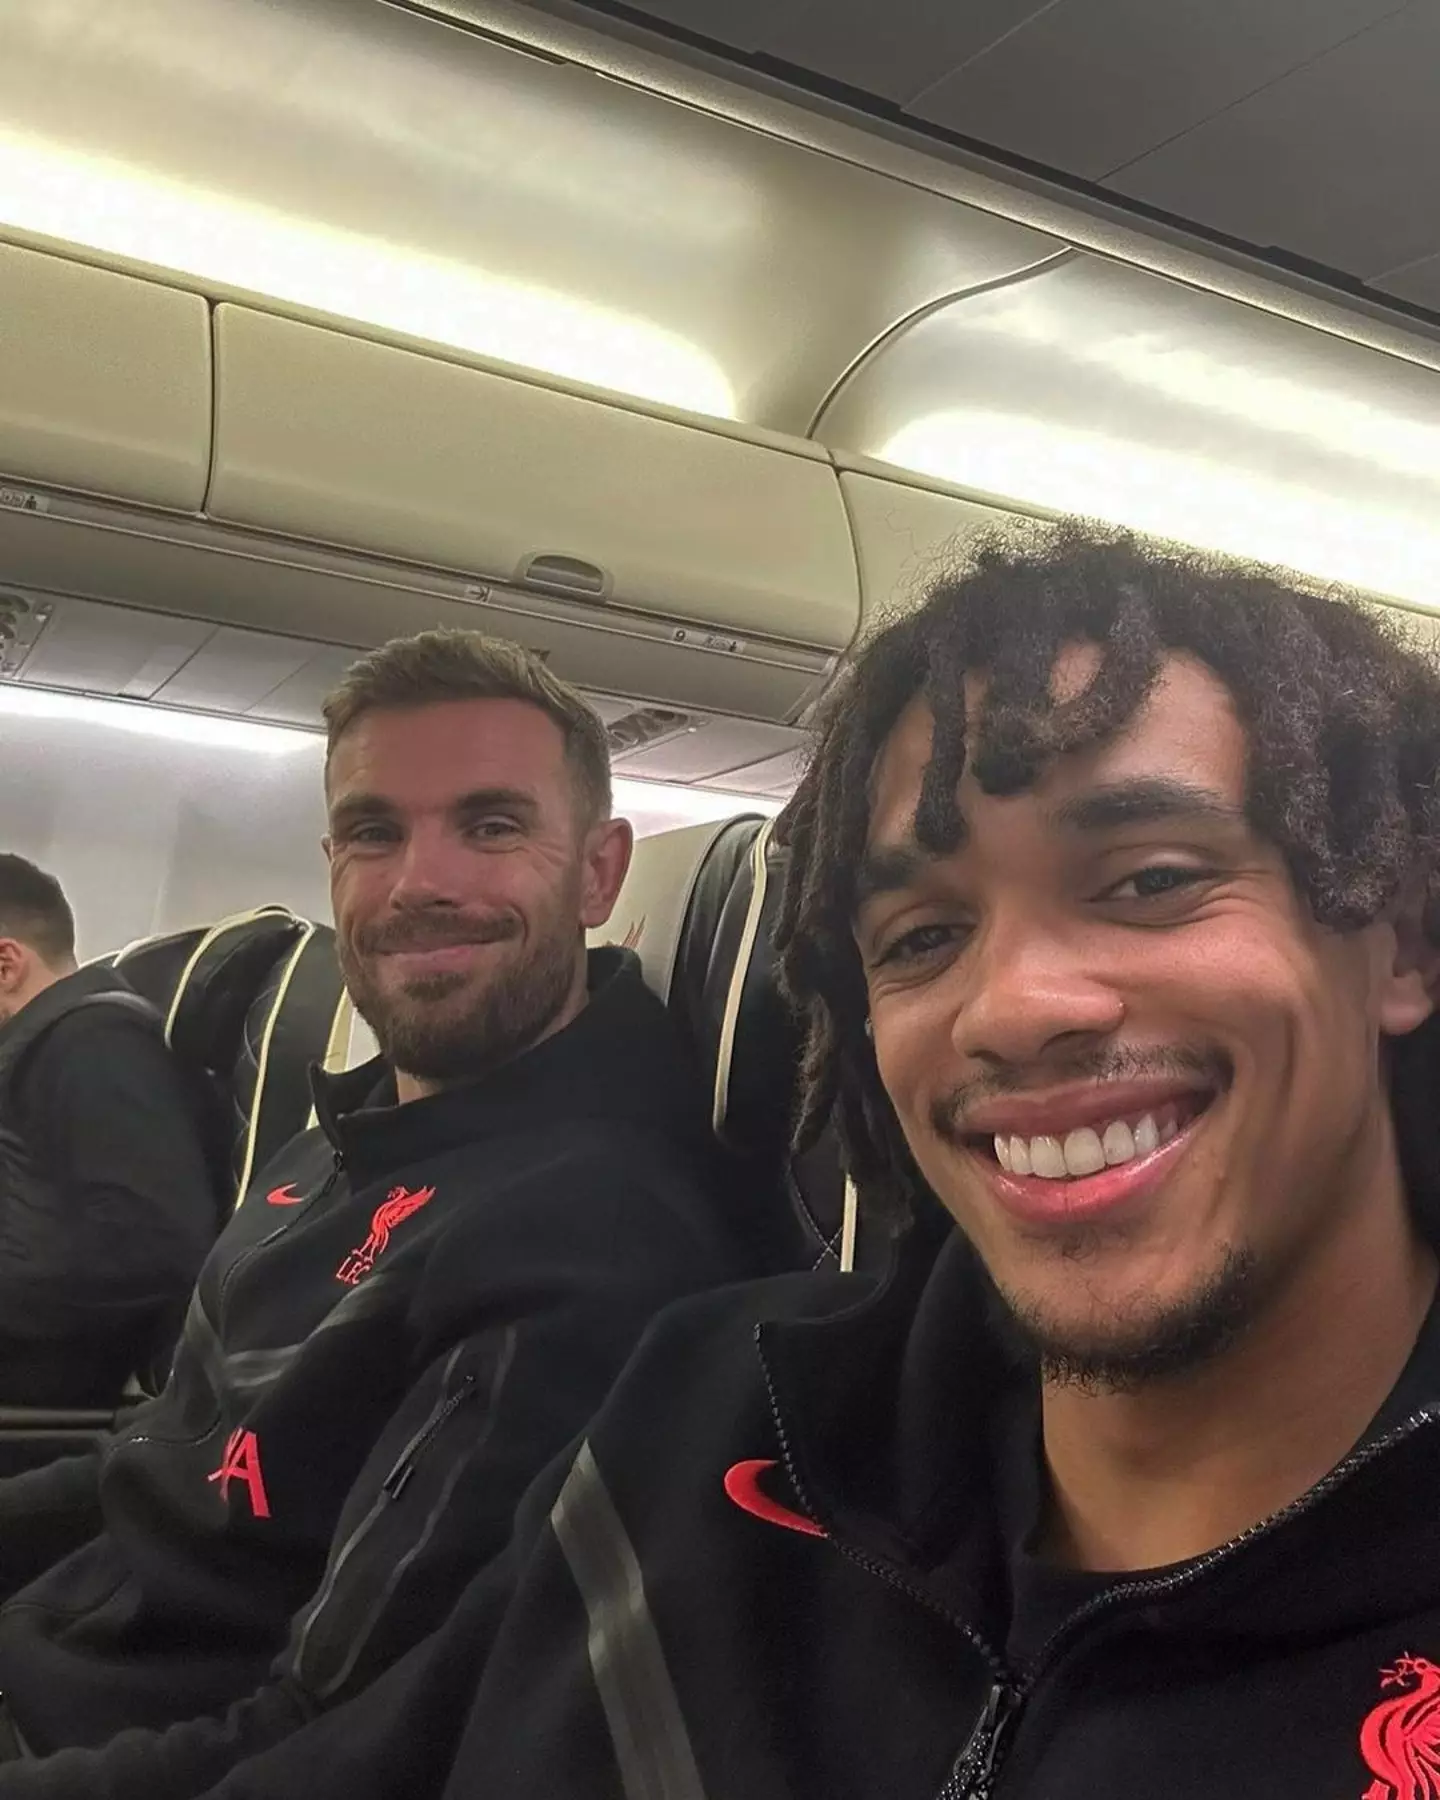 Liverpool travelled just 33 minutes back from their fixture in Newcastle.